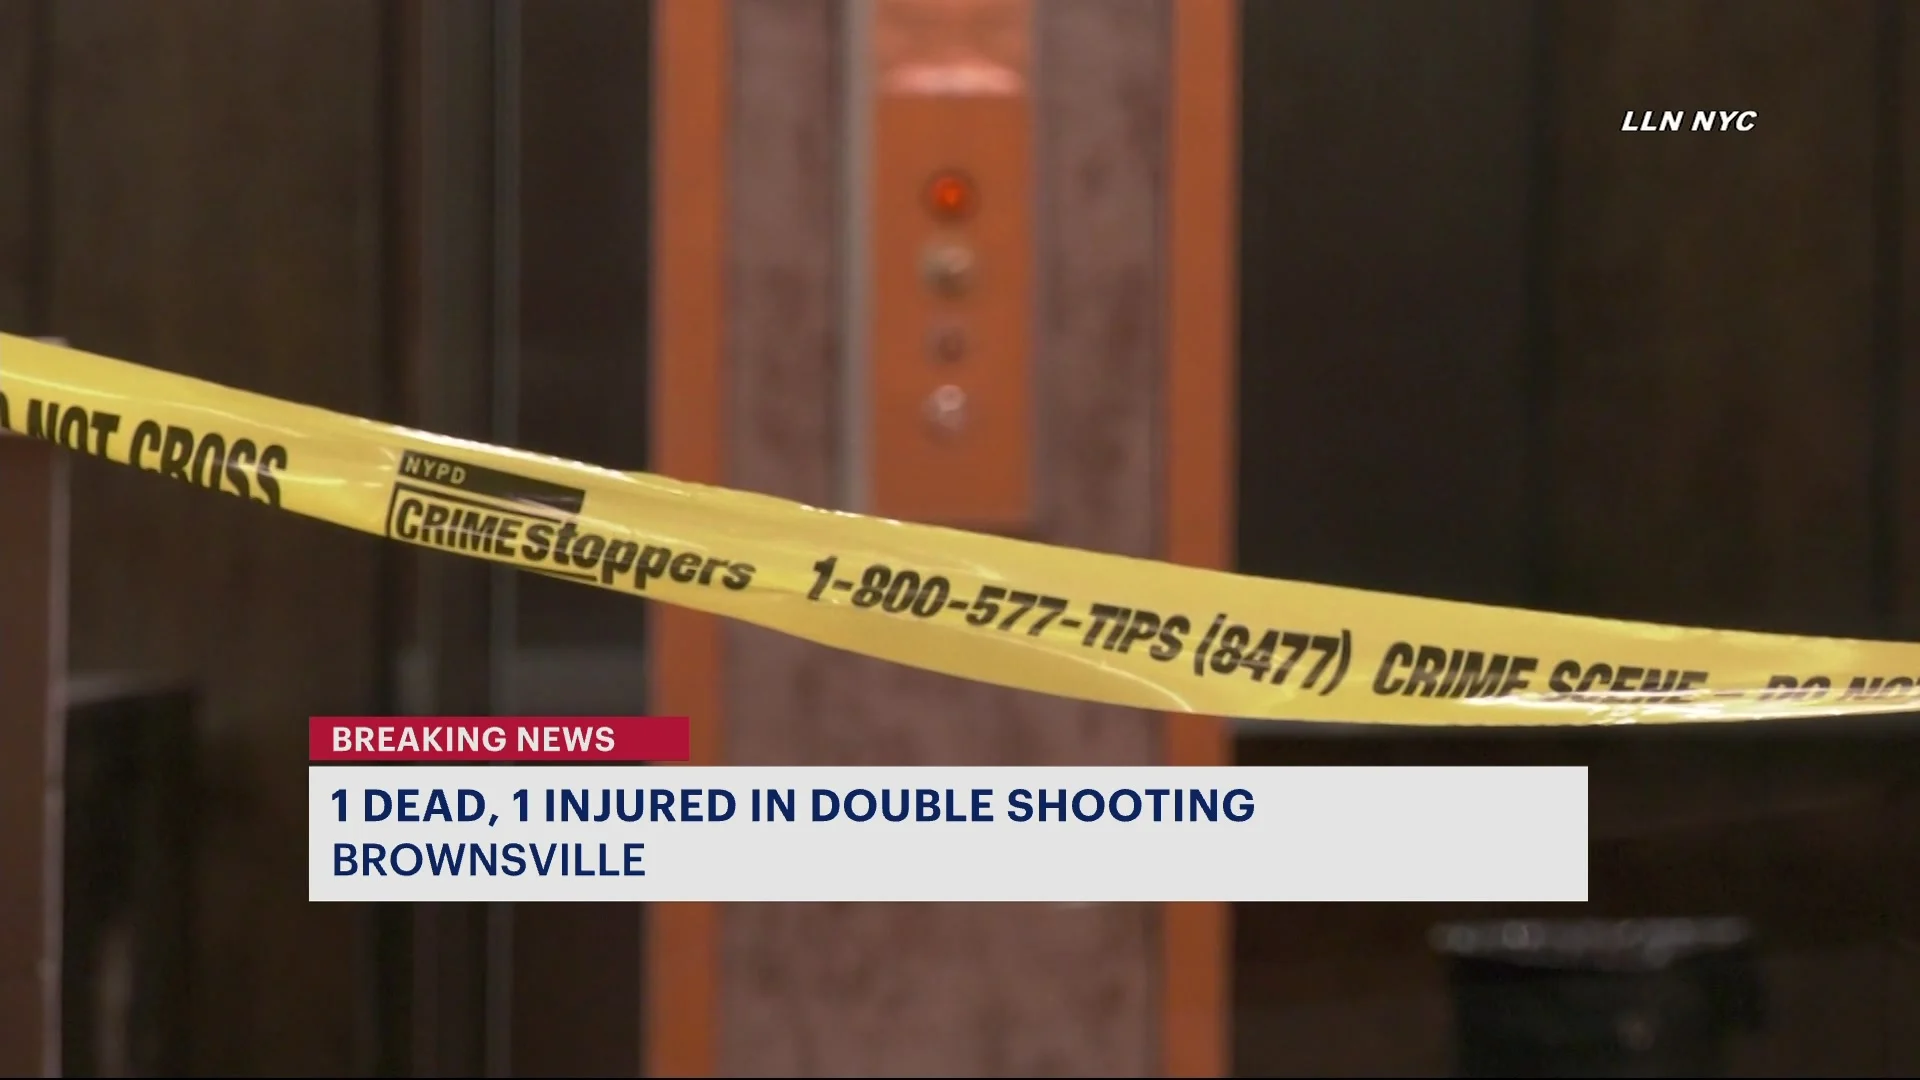 NYPD: 1 person dead, another injured in overnight double shooting in Brownsville